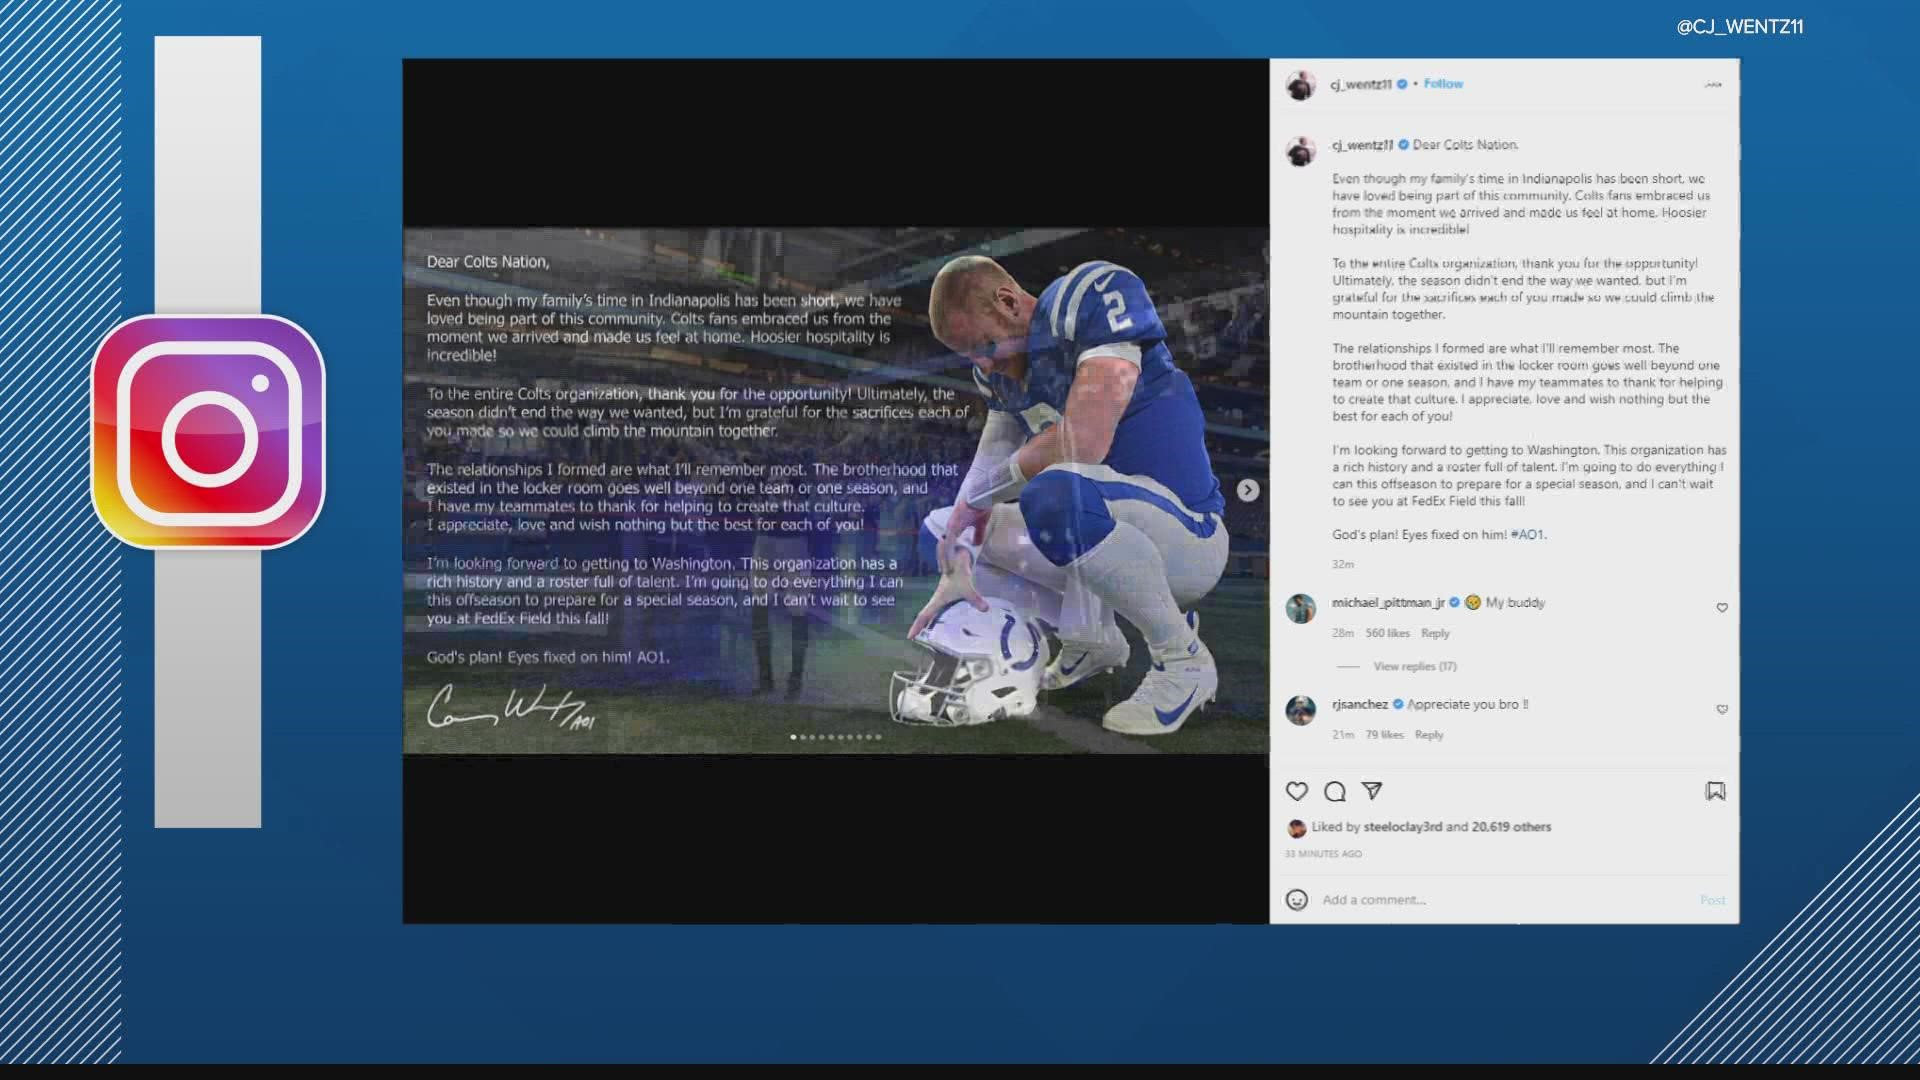 Former Colts QB Carson Wentz releases farewell statement to fans